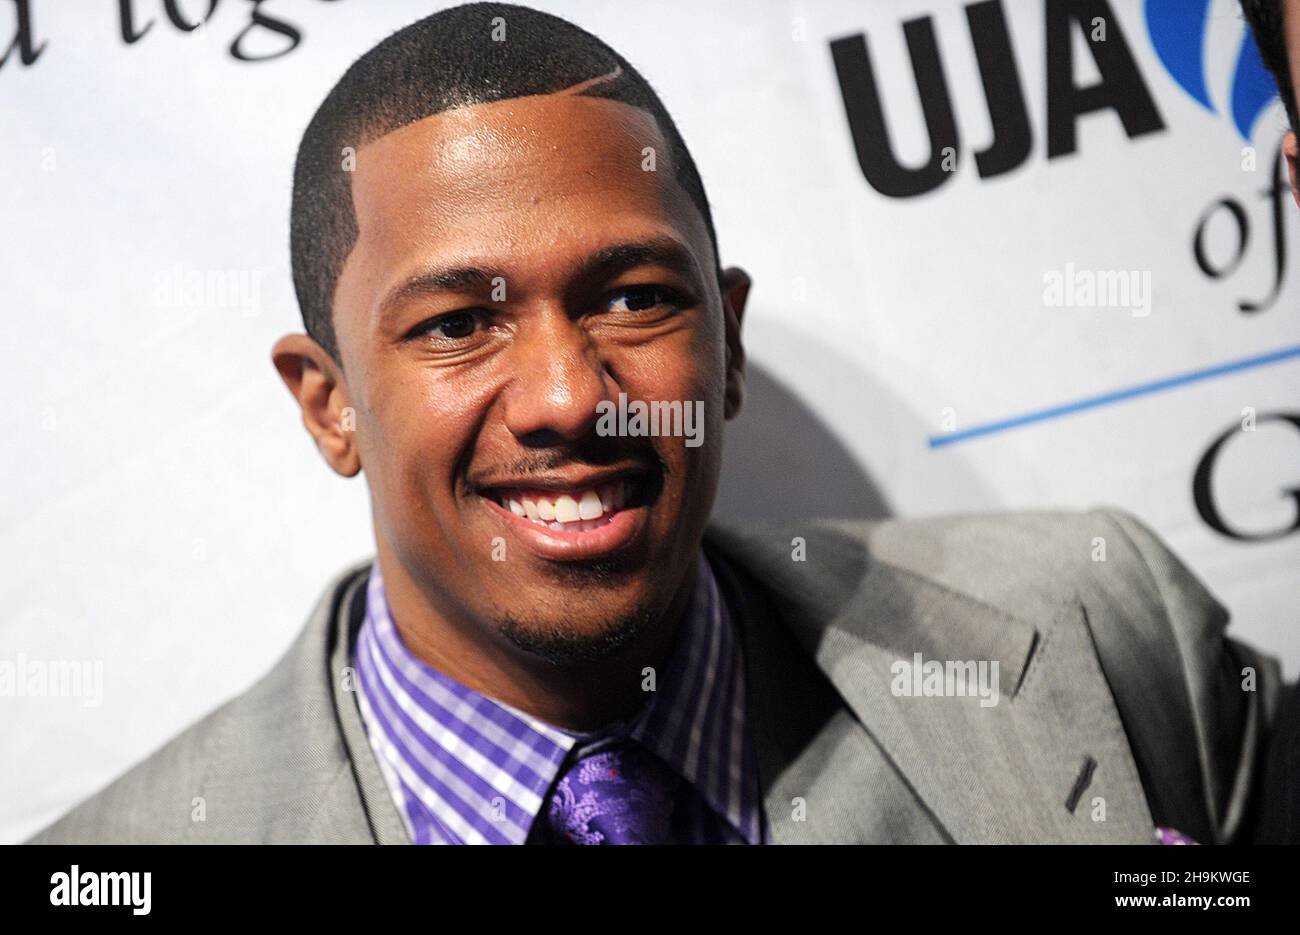 Manhattan, United States Of America. 30th May, 2013. SMG_Nick Cannon_NY1_Leadership Awards_052813_11.JPG NEW YORK, NY - MAY 28: Nick Cannon attends the UJA-Federation Of New York Entertainment, Media And Communications Leadership Awards Dinner at Pier Sixty at Chelsea Piers on May 28, 2013 in New York City. People: Nick Cannon Credit: Storms Media Group/Alamy Live News Stock Photo